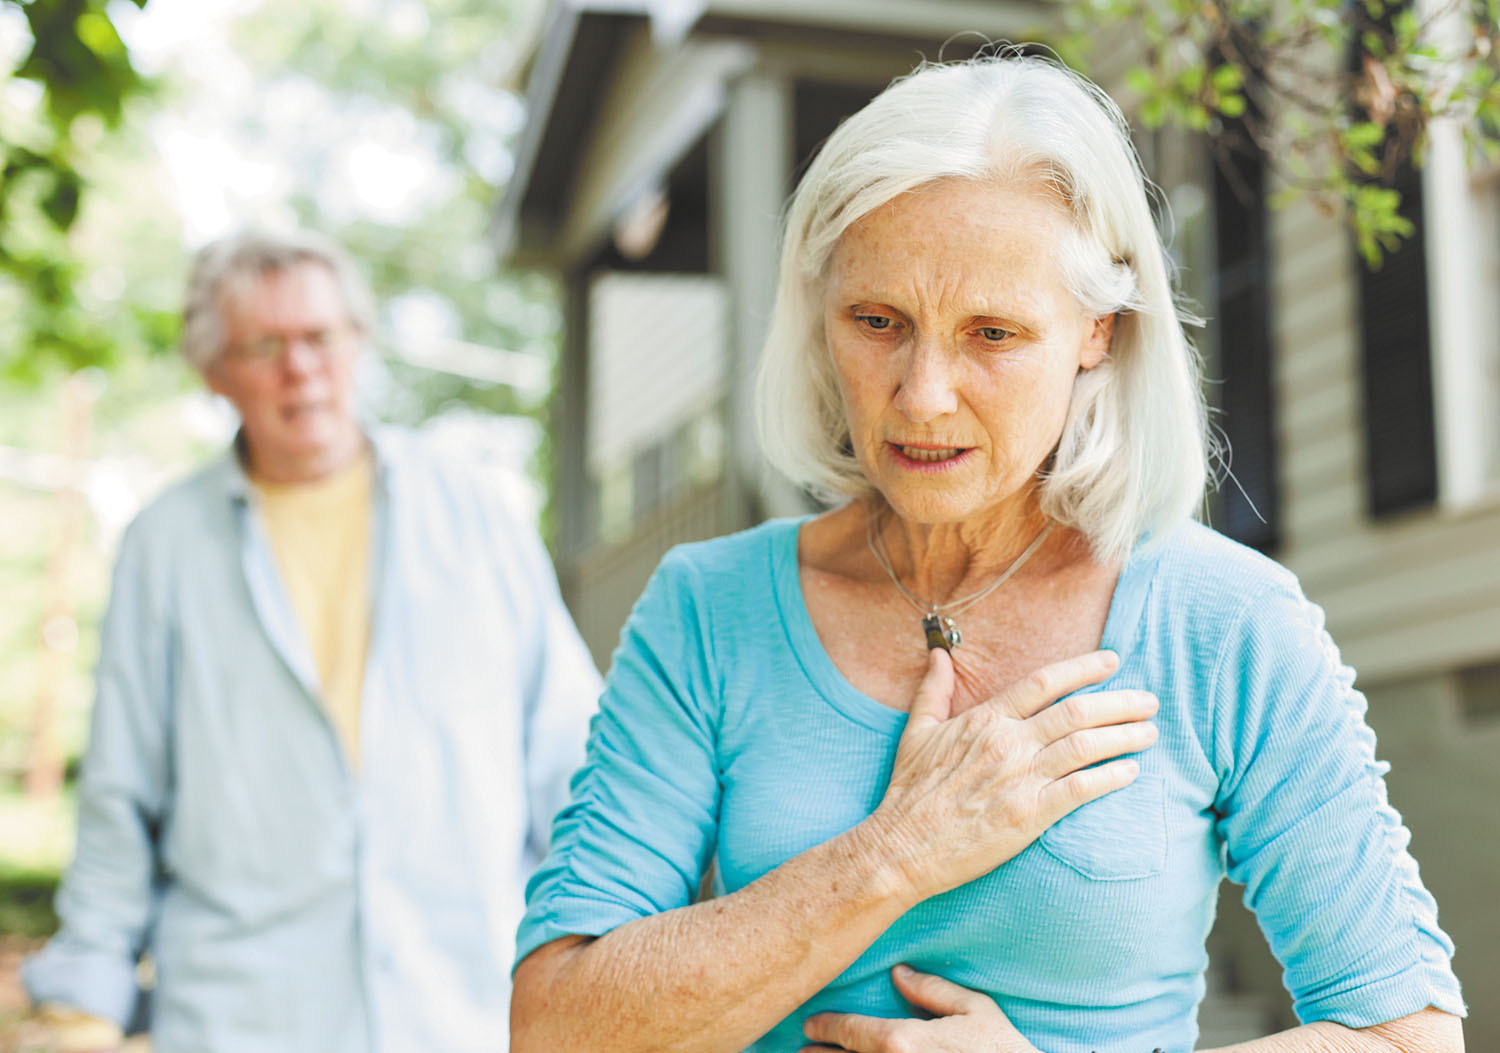 Stay on top of heart failure symptoms